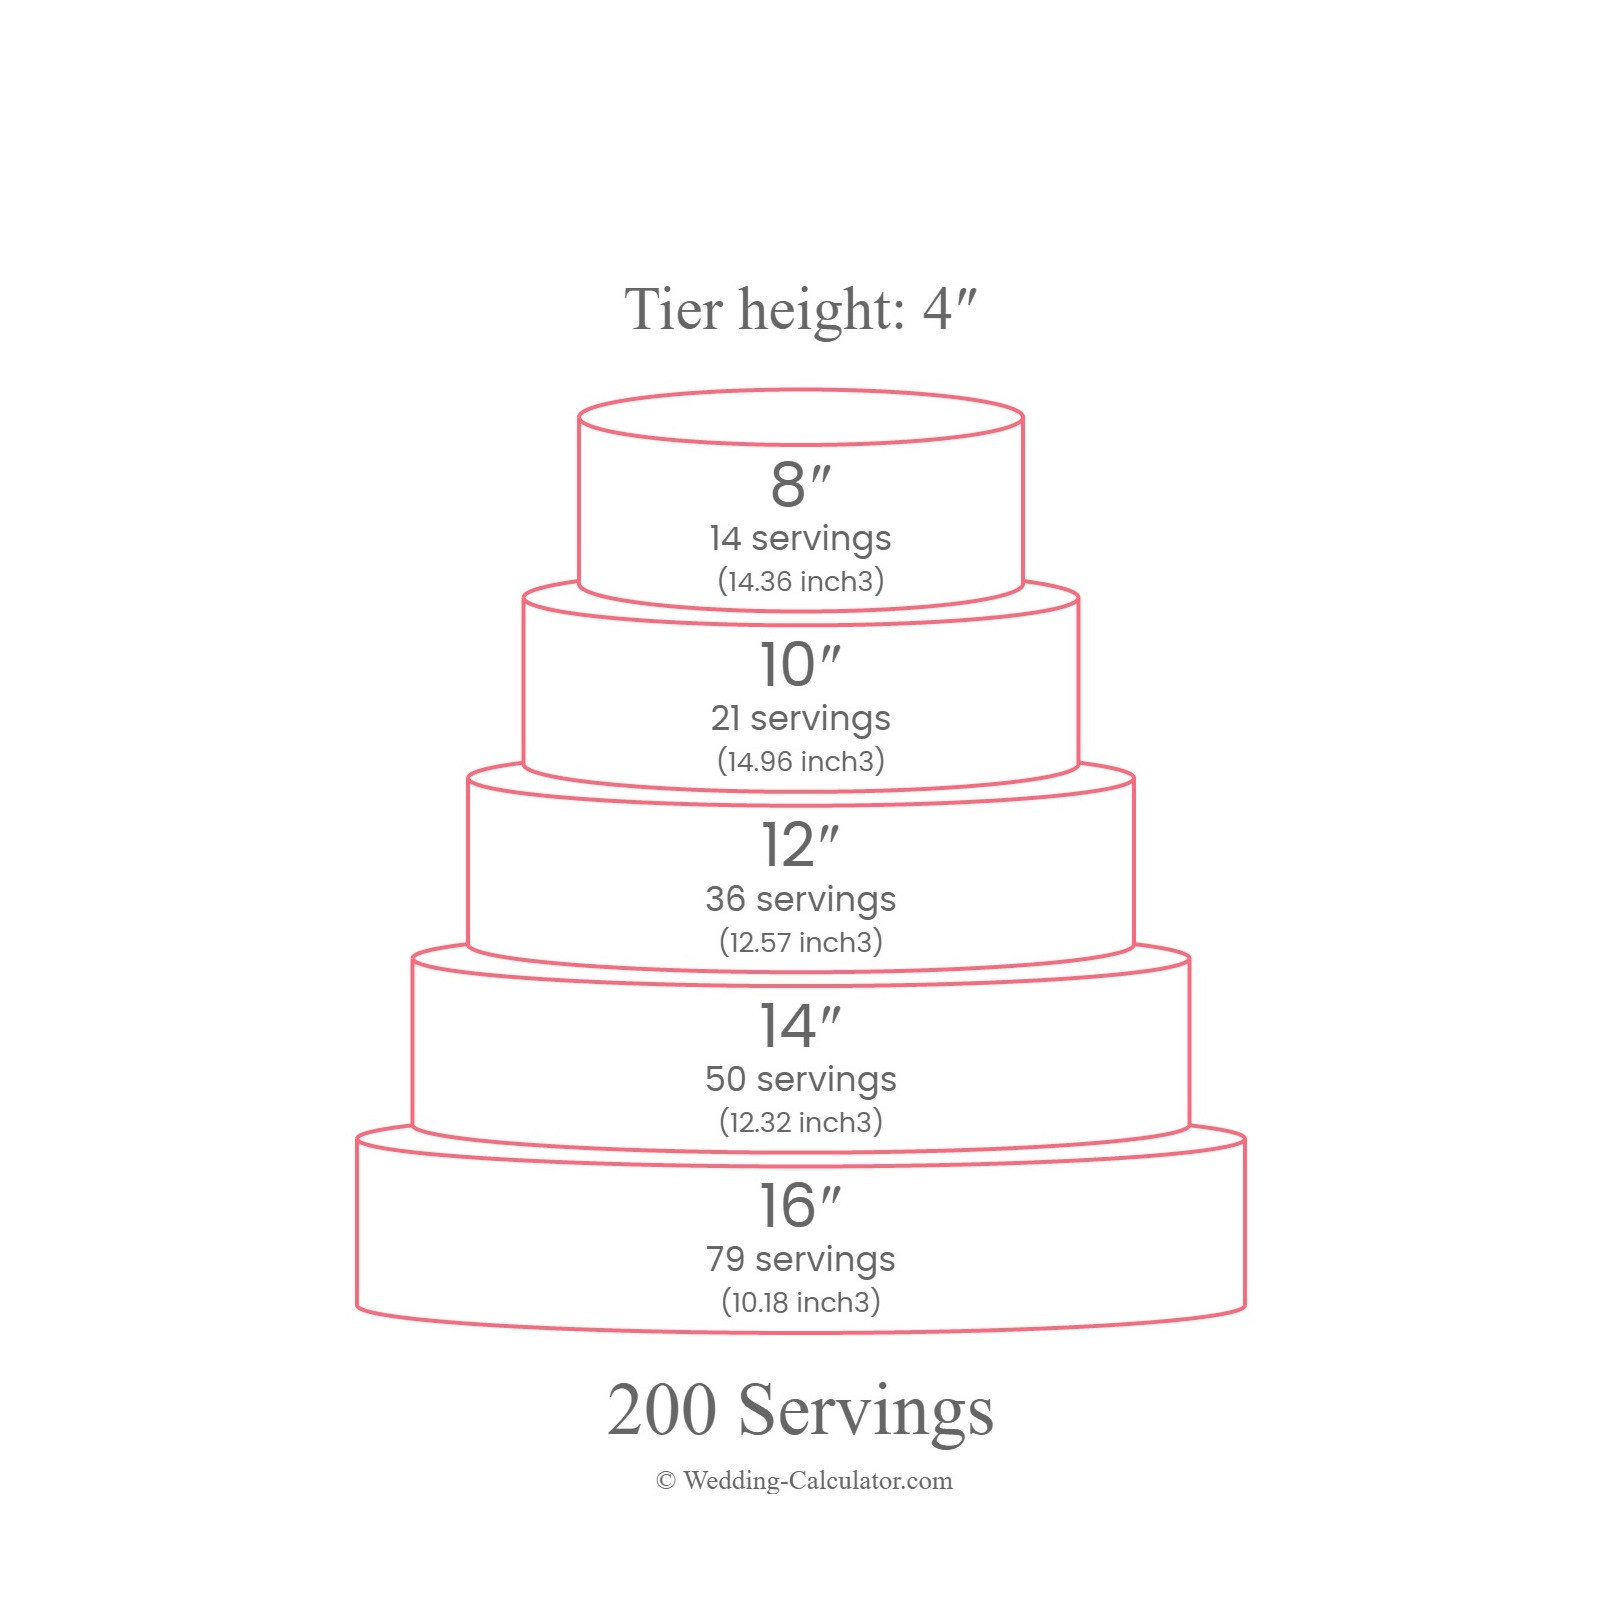 Another wedding cake size for 200 people